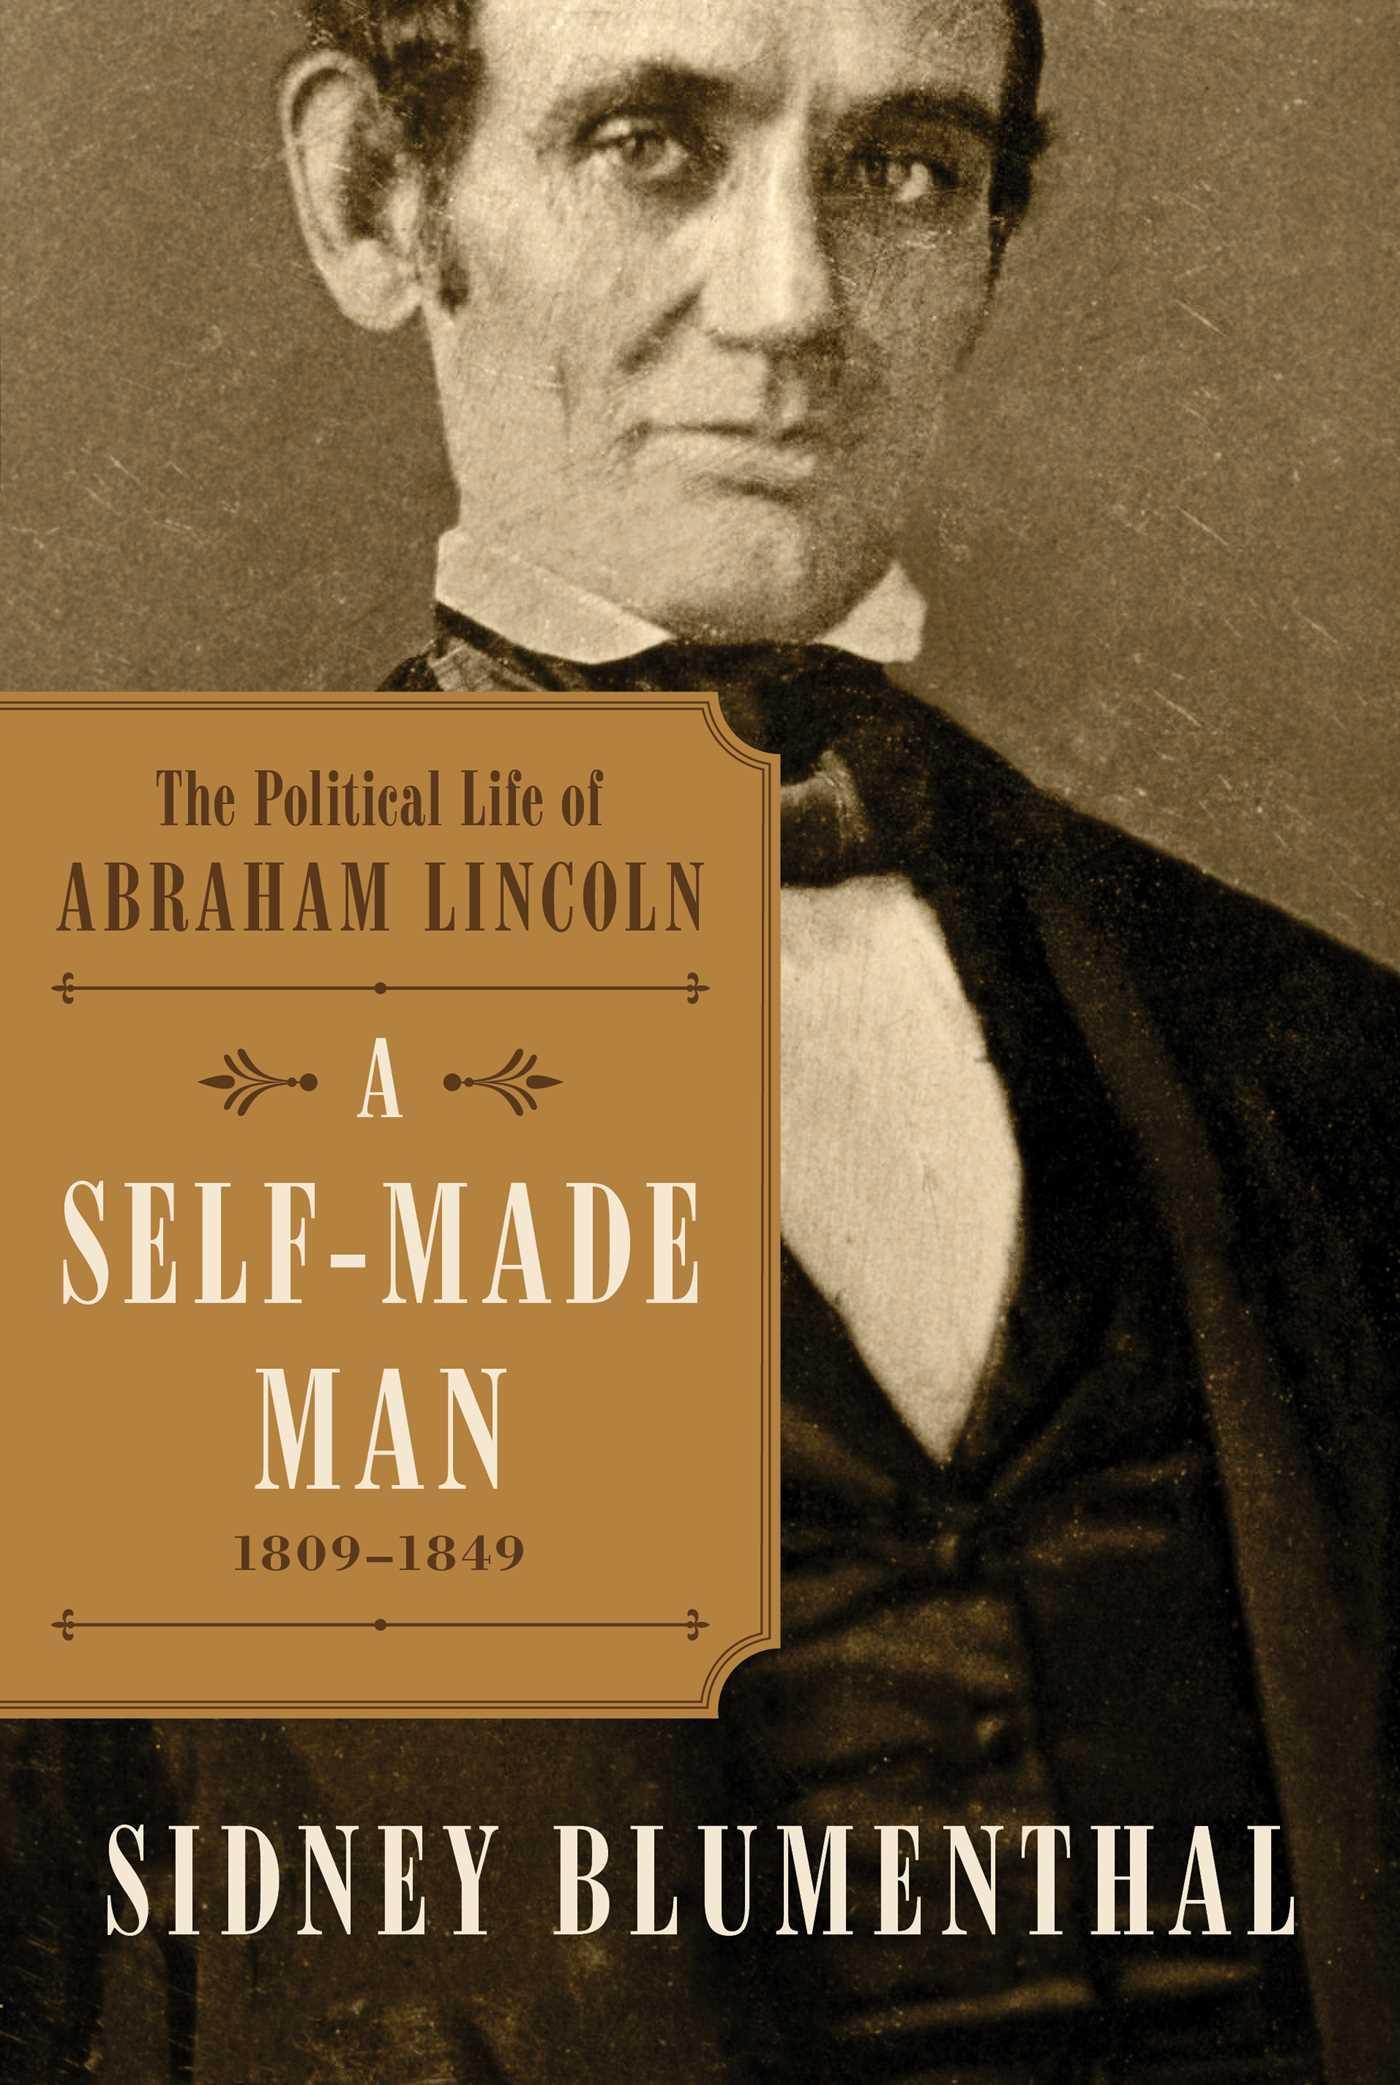 #1342: “History Class: Abe Lincoln – Self Made Politician”